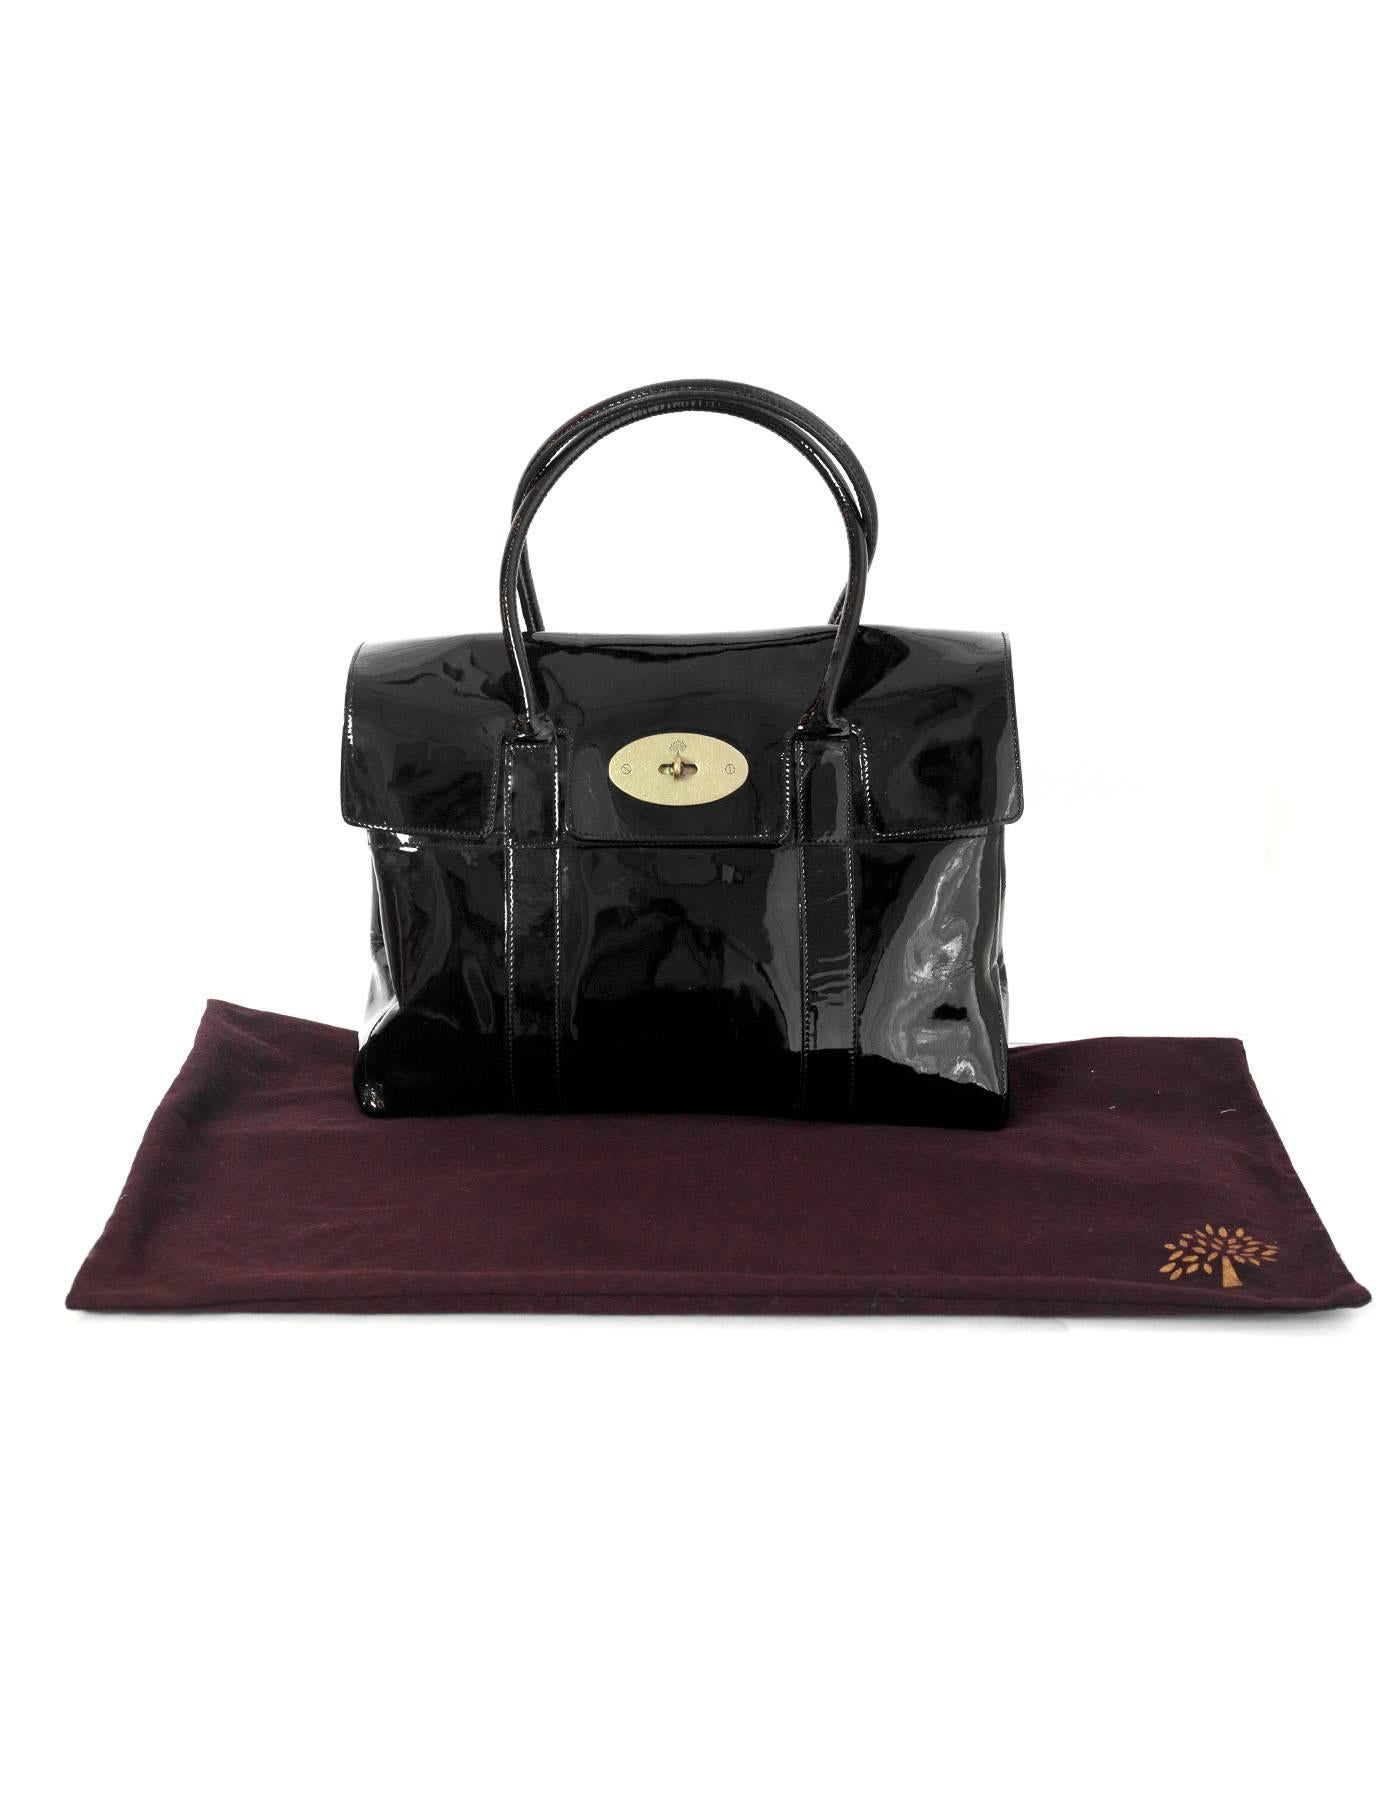 Mulberry Black Patent Leather Bayswater Tote Bag 3